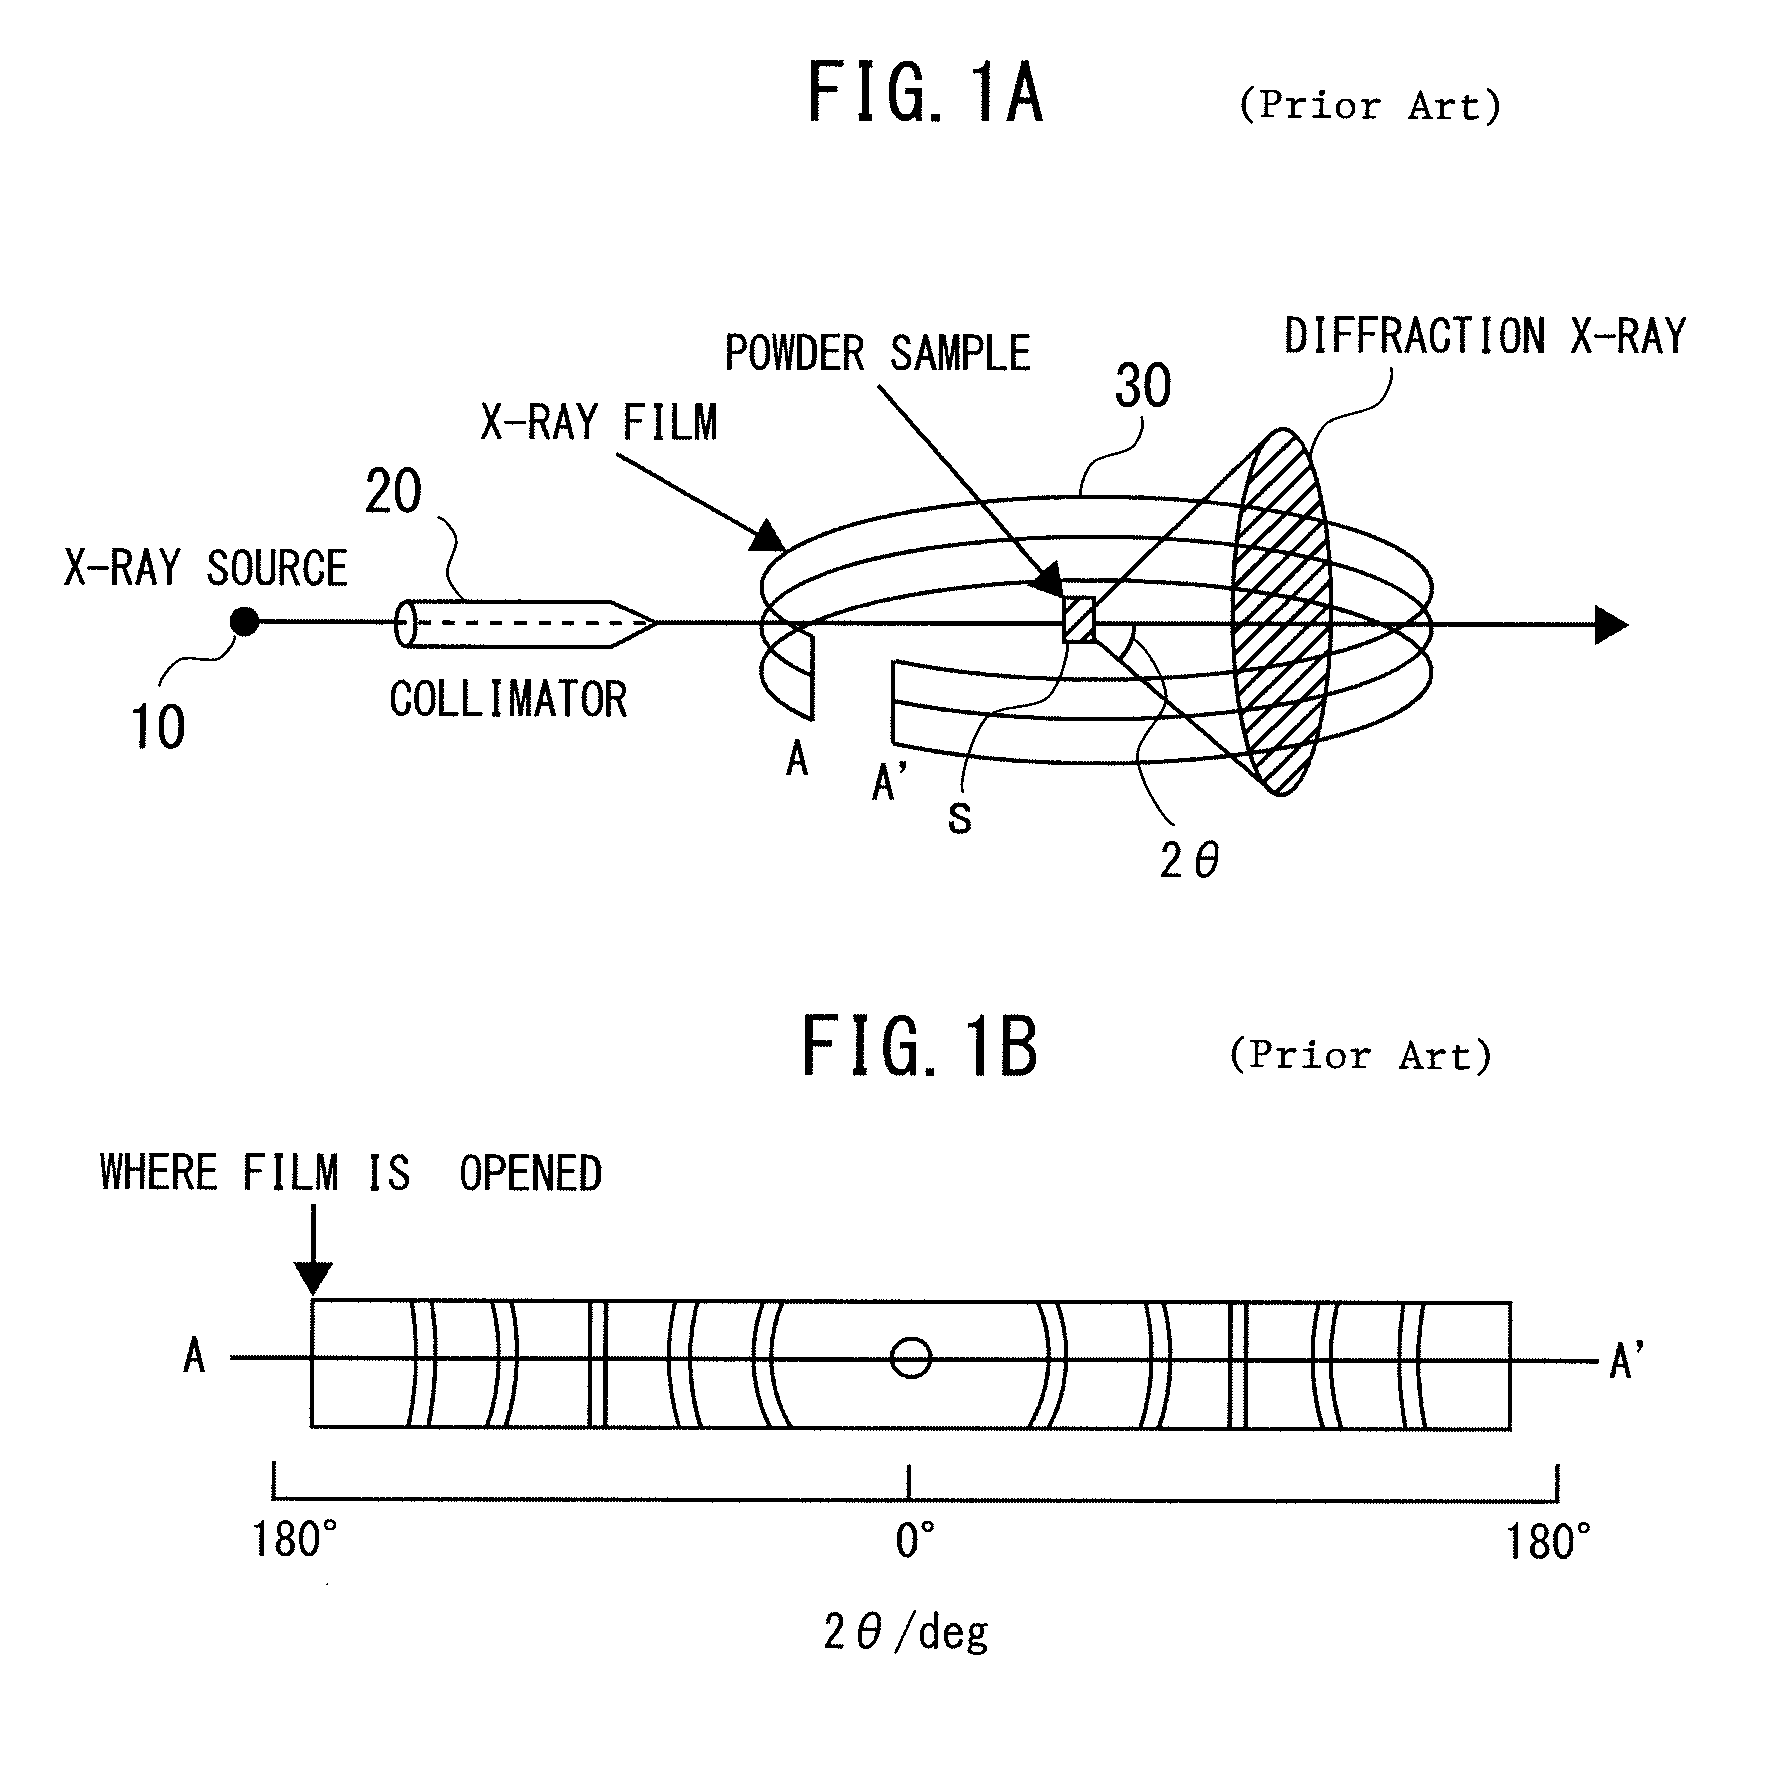 X-ray diffraction measuring apparatus having debye-scherrer optical system therein, and an X-ray diffraction measuring method for the same